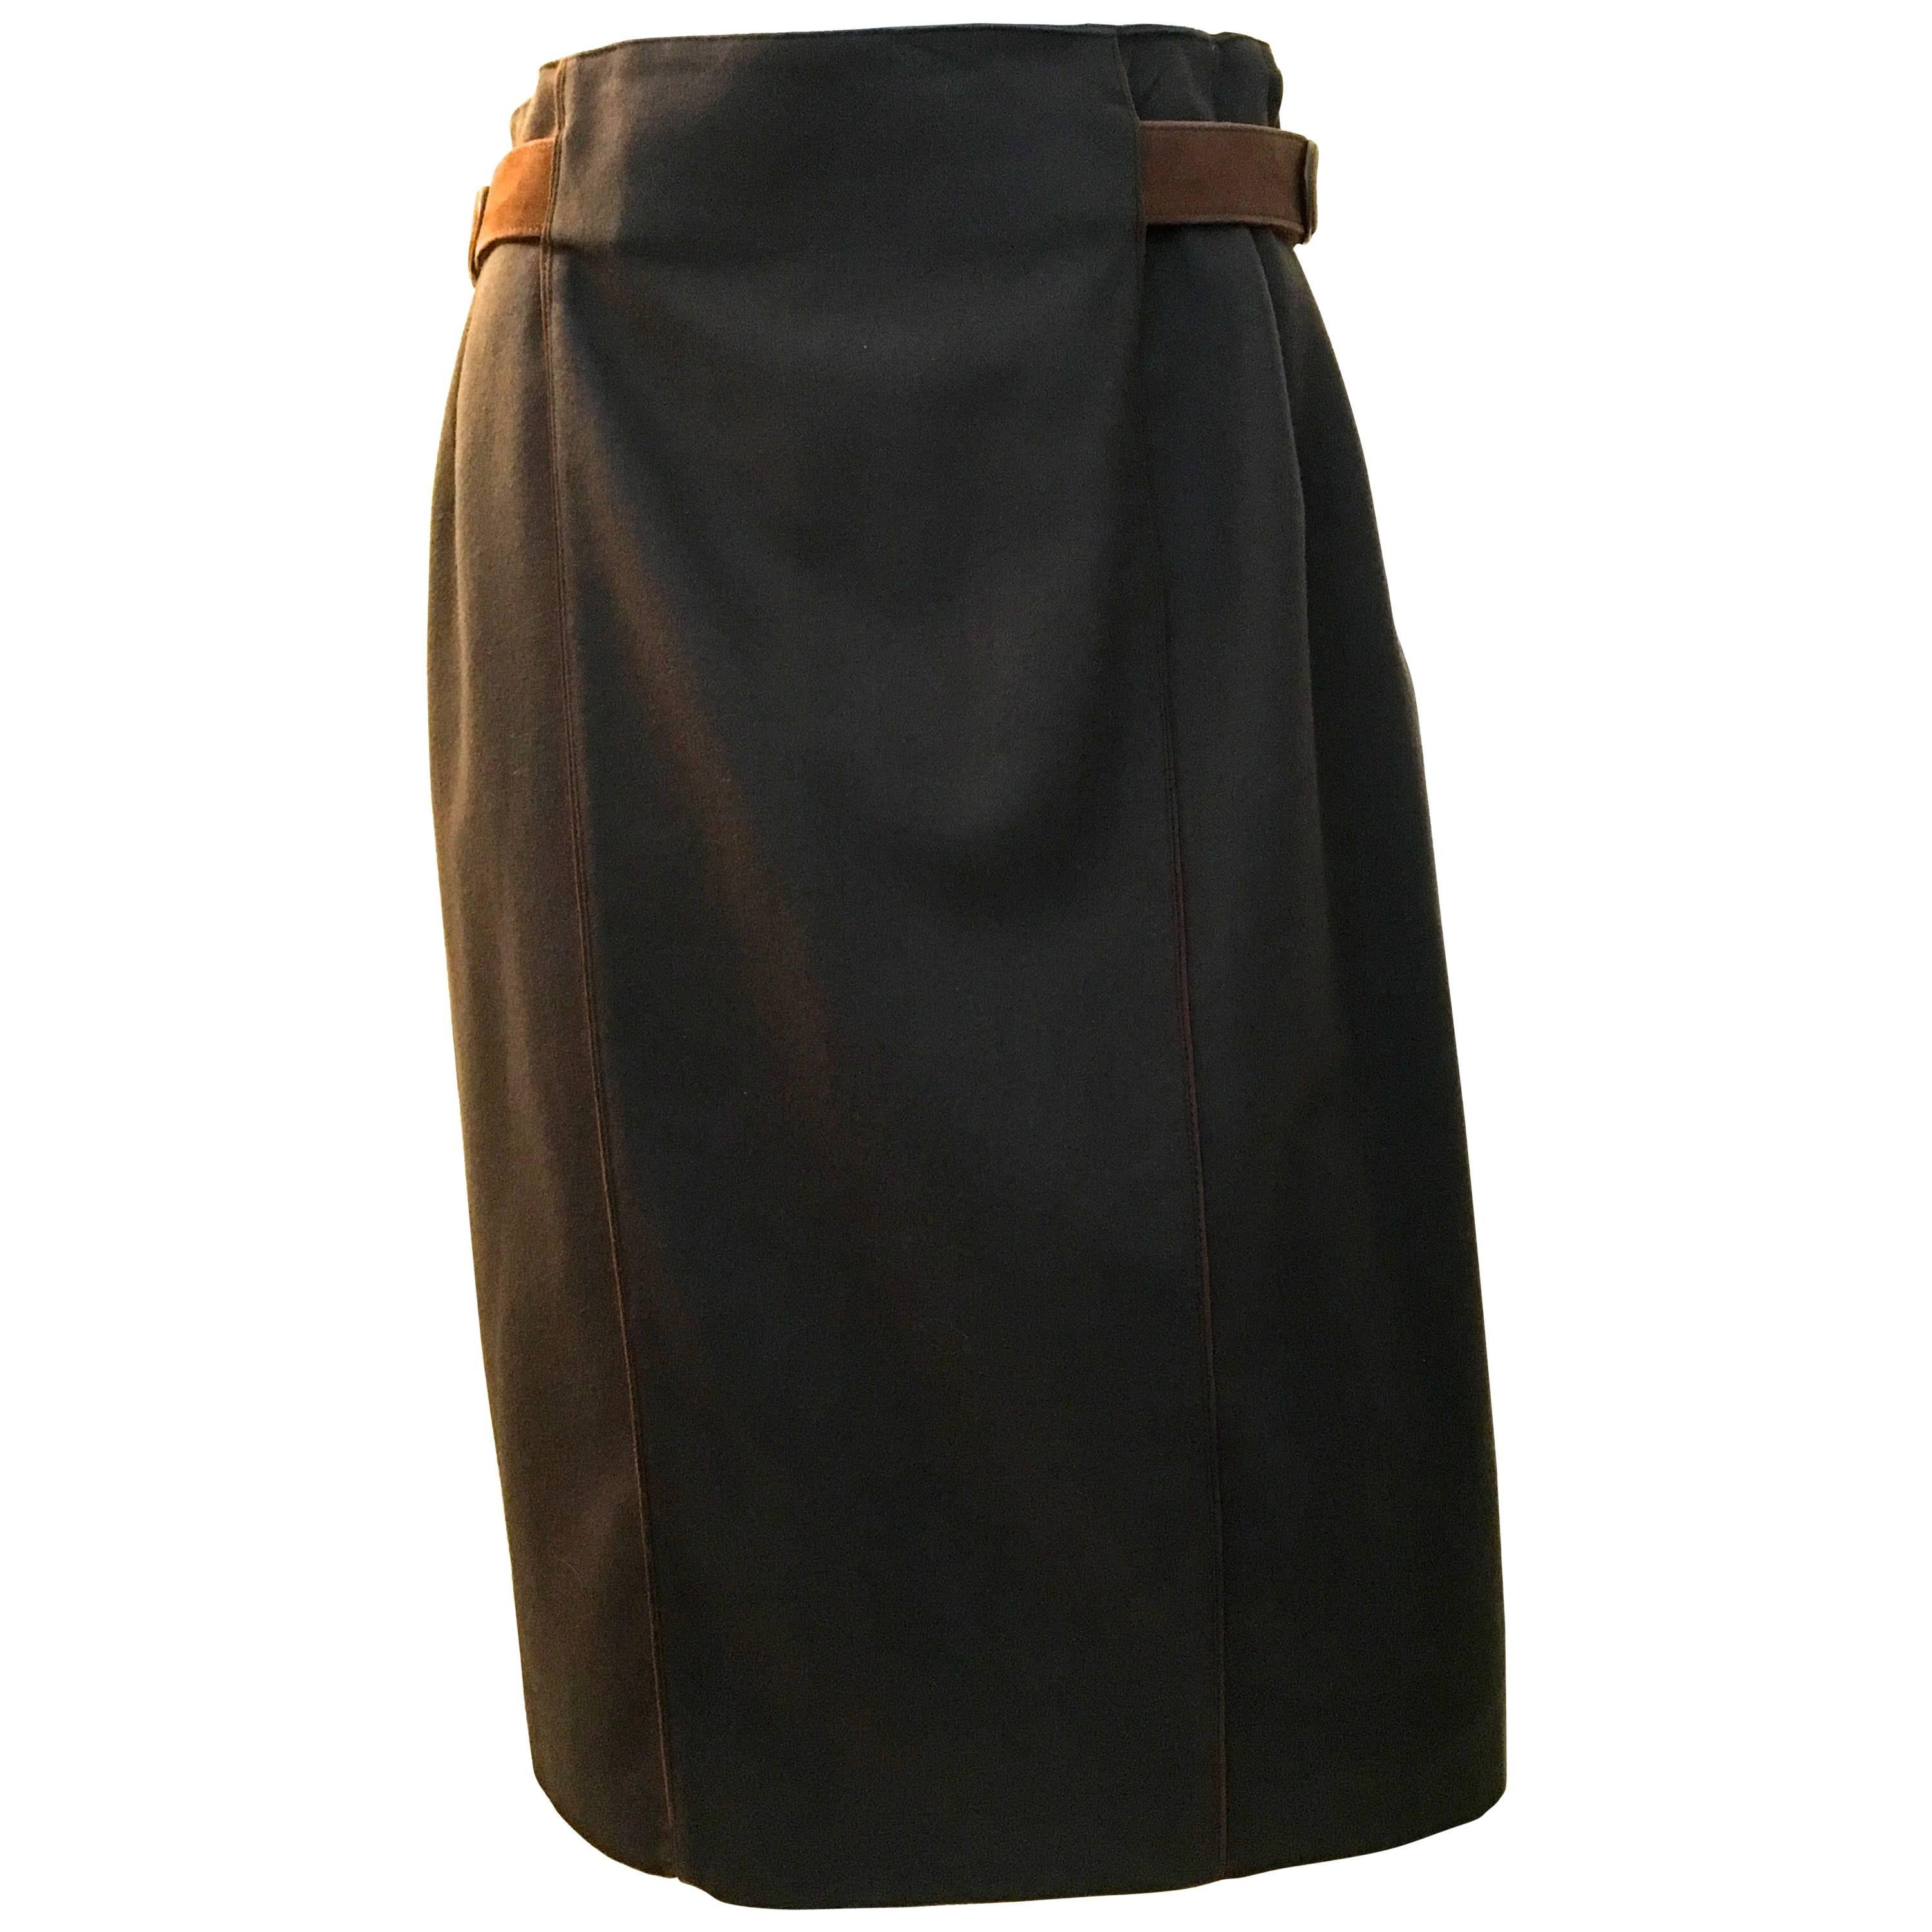 Gucci Skirt w/ Leather Belt - Rare For Sale